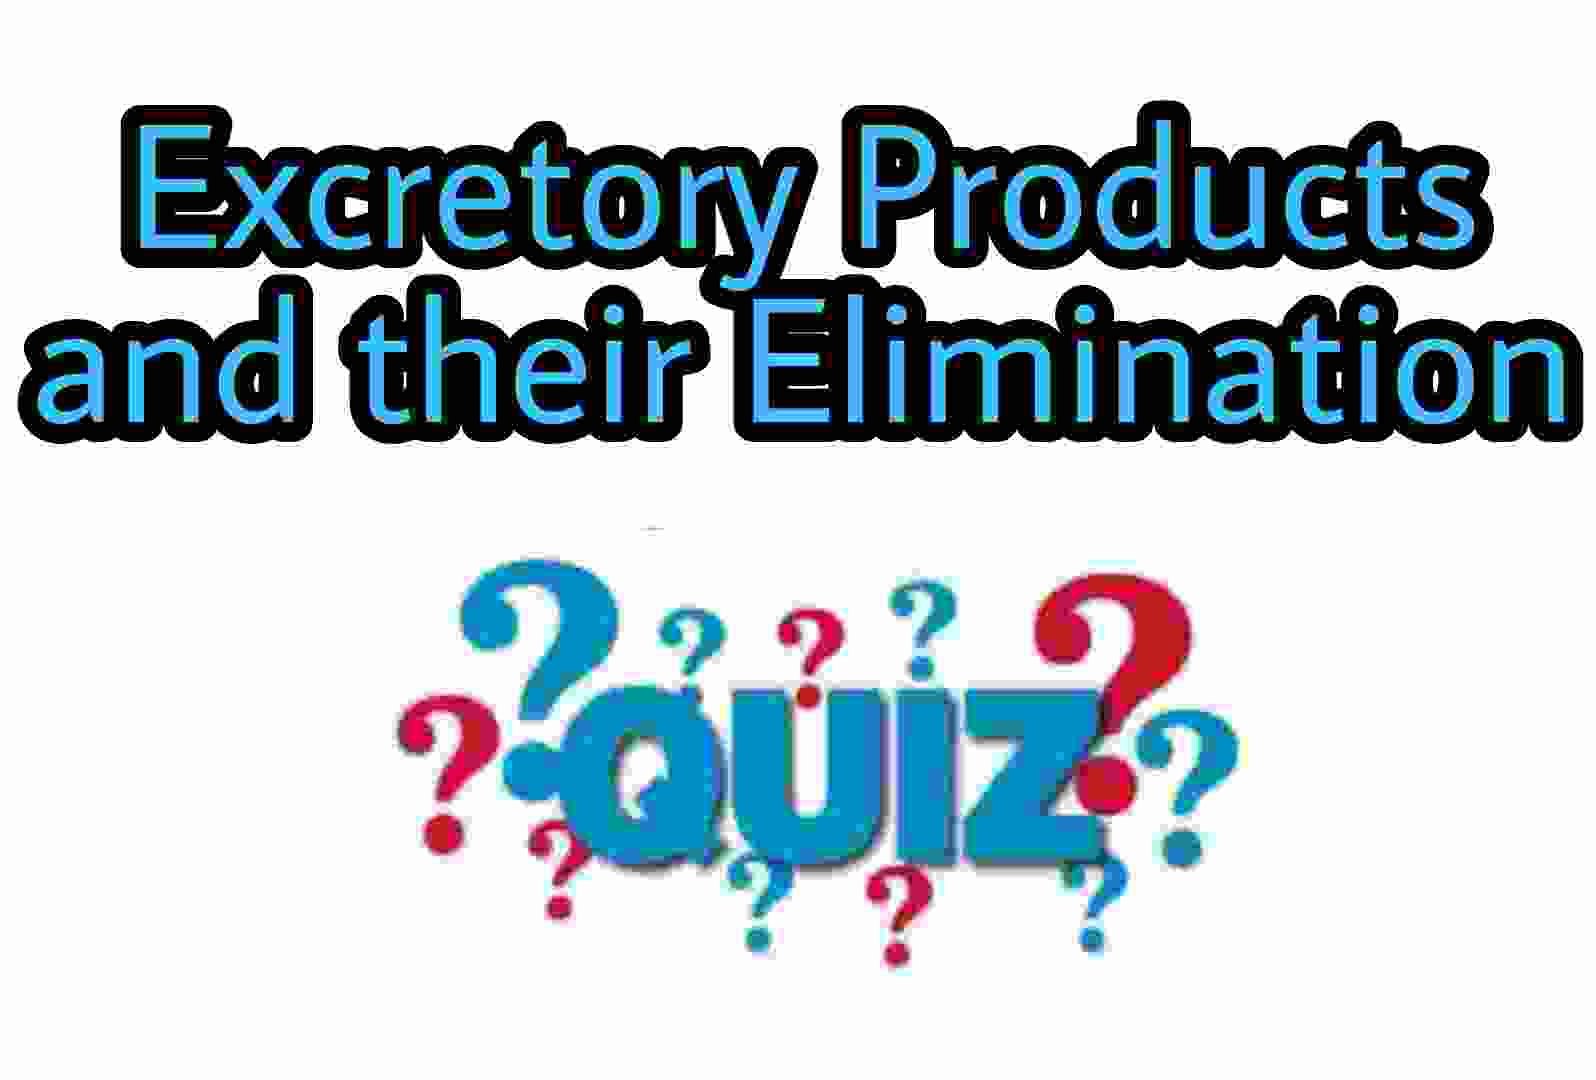 Excretory Products and their Elimination Quiz